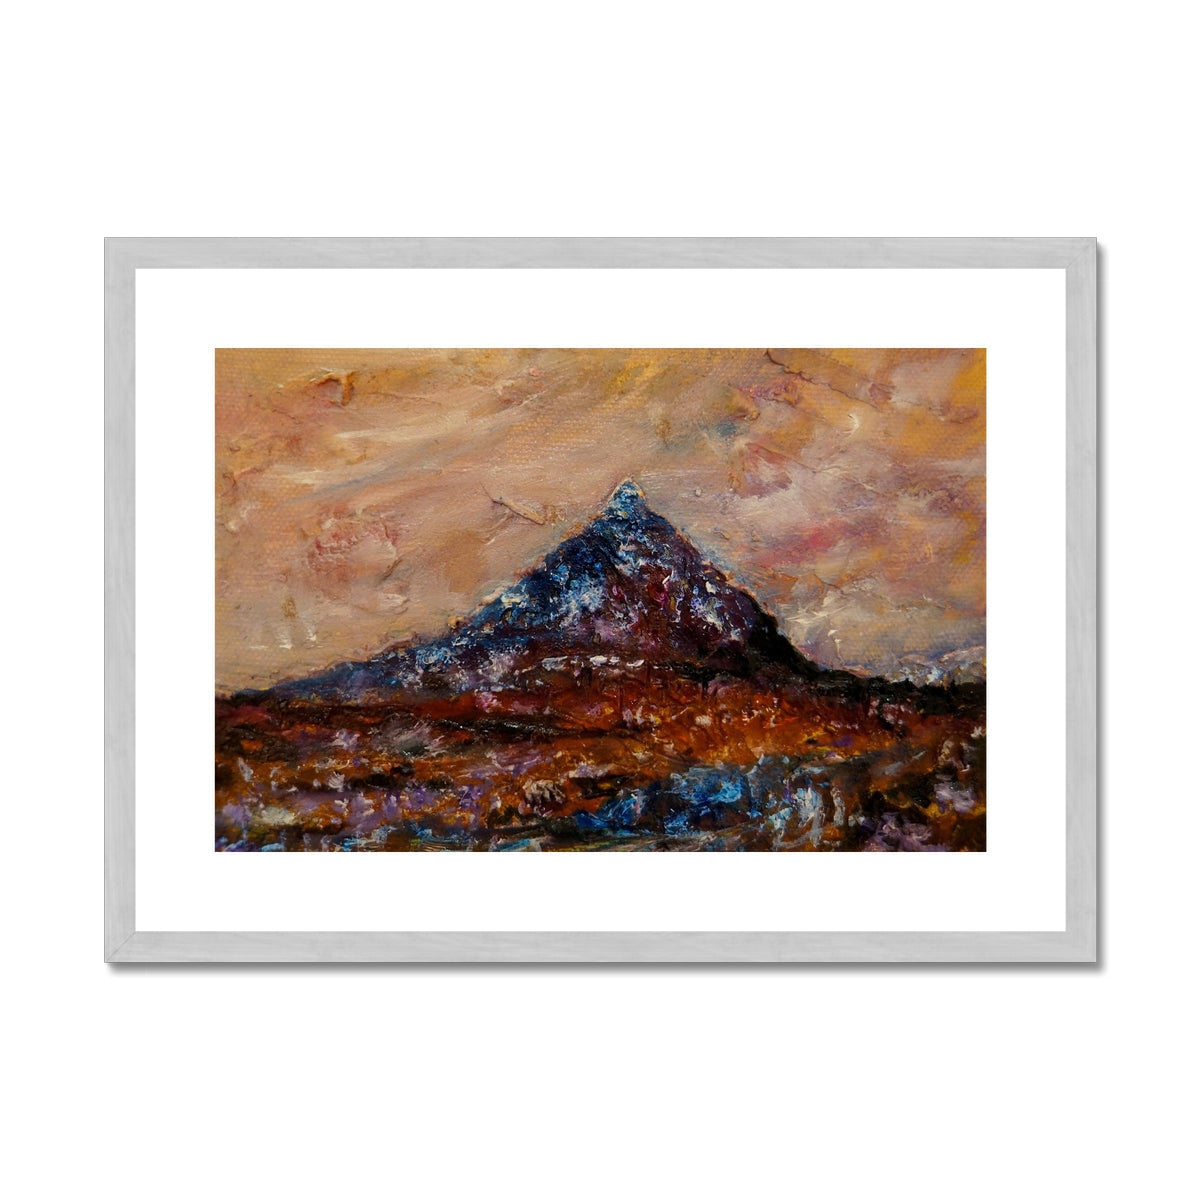 Buachaille Etive Mòr Painting | Antique Framed & Mounted Prints From Scotland-Antique Framed & Mounted Prints-Glencoe Art Gallery-A2 Landscape-Silver Frame-Paintings, Prints, Homeware, Art Gifts From Scotland By Scottish Artist Kevin Hunter